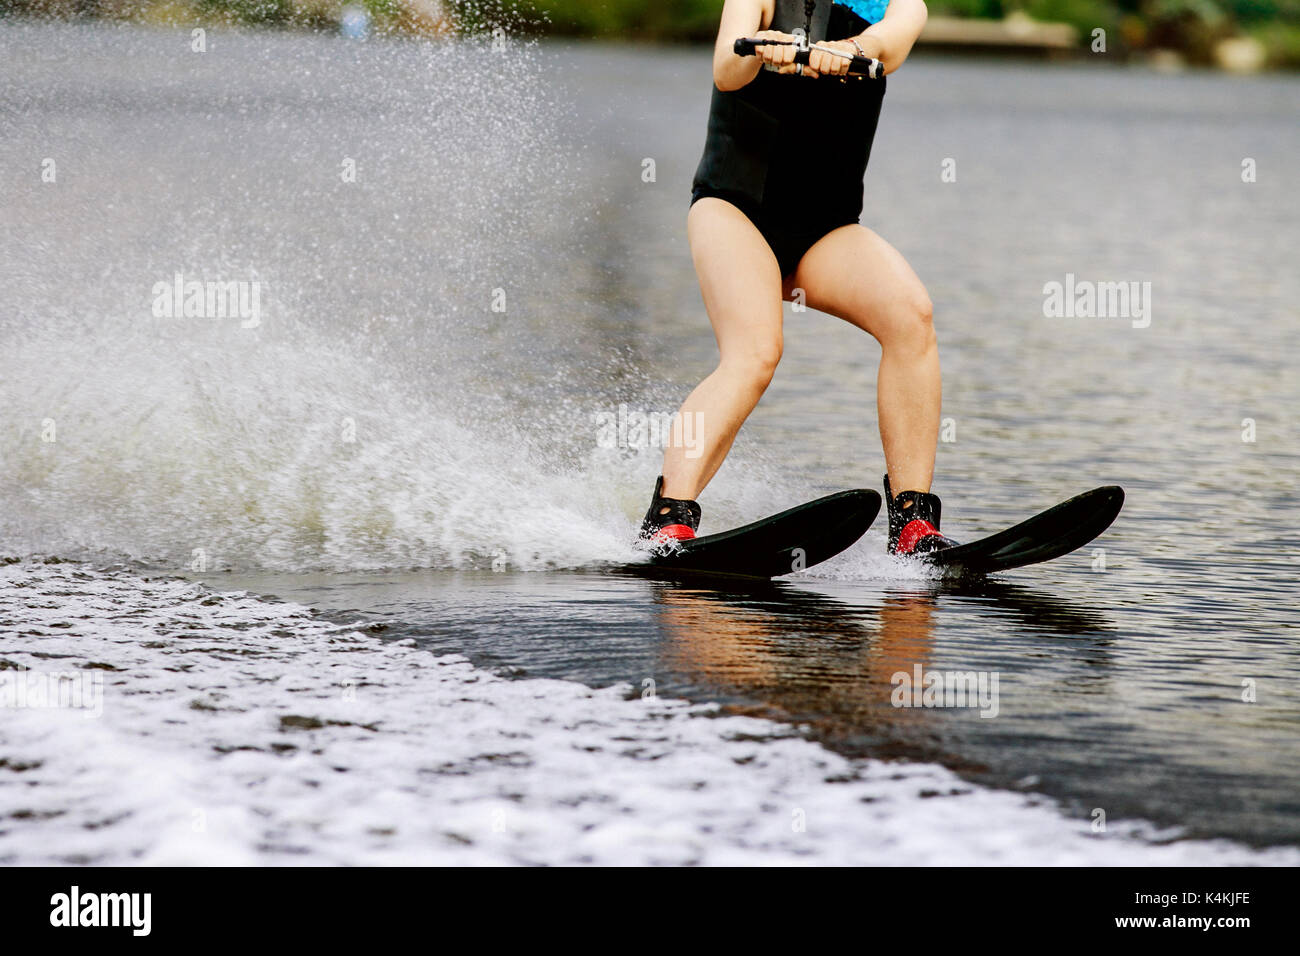 young woman on water ski rides on lake water spray Stock Photo